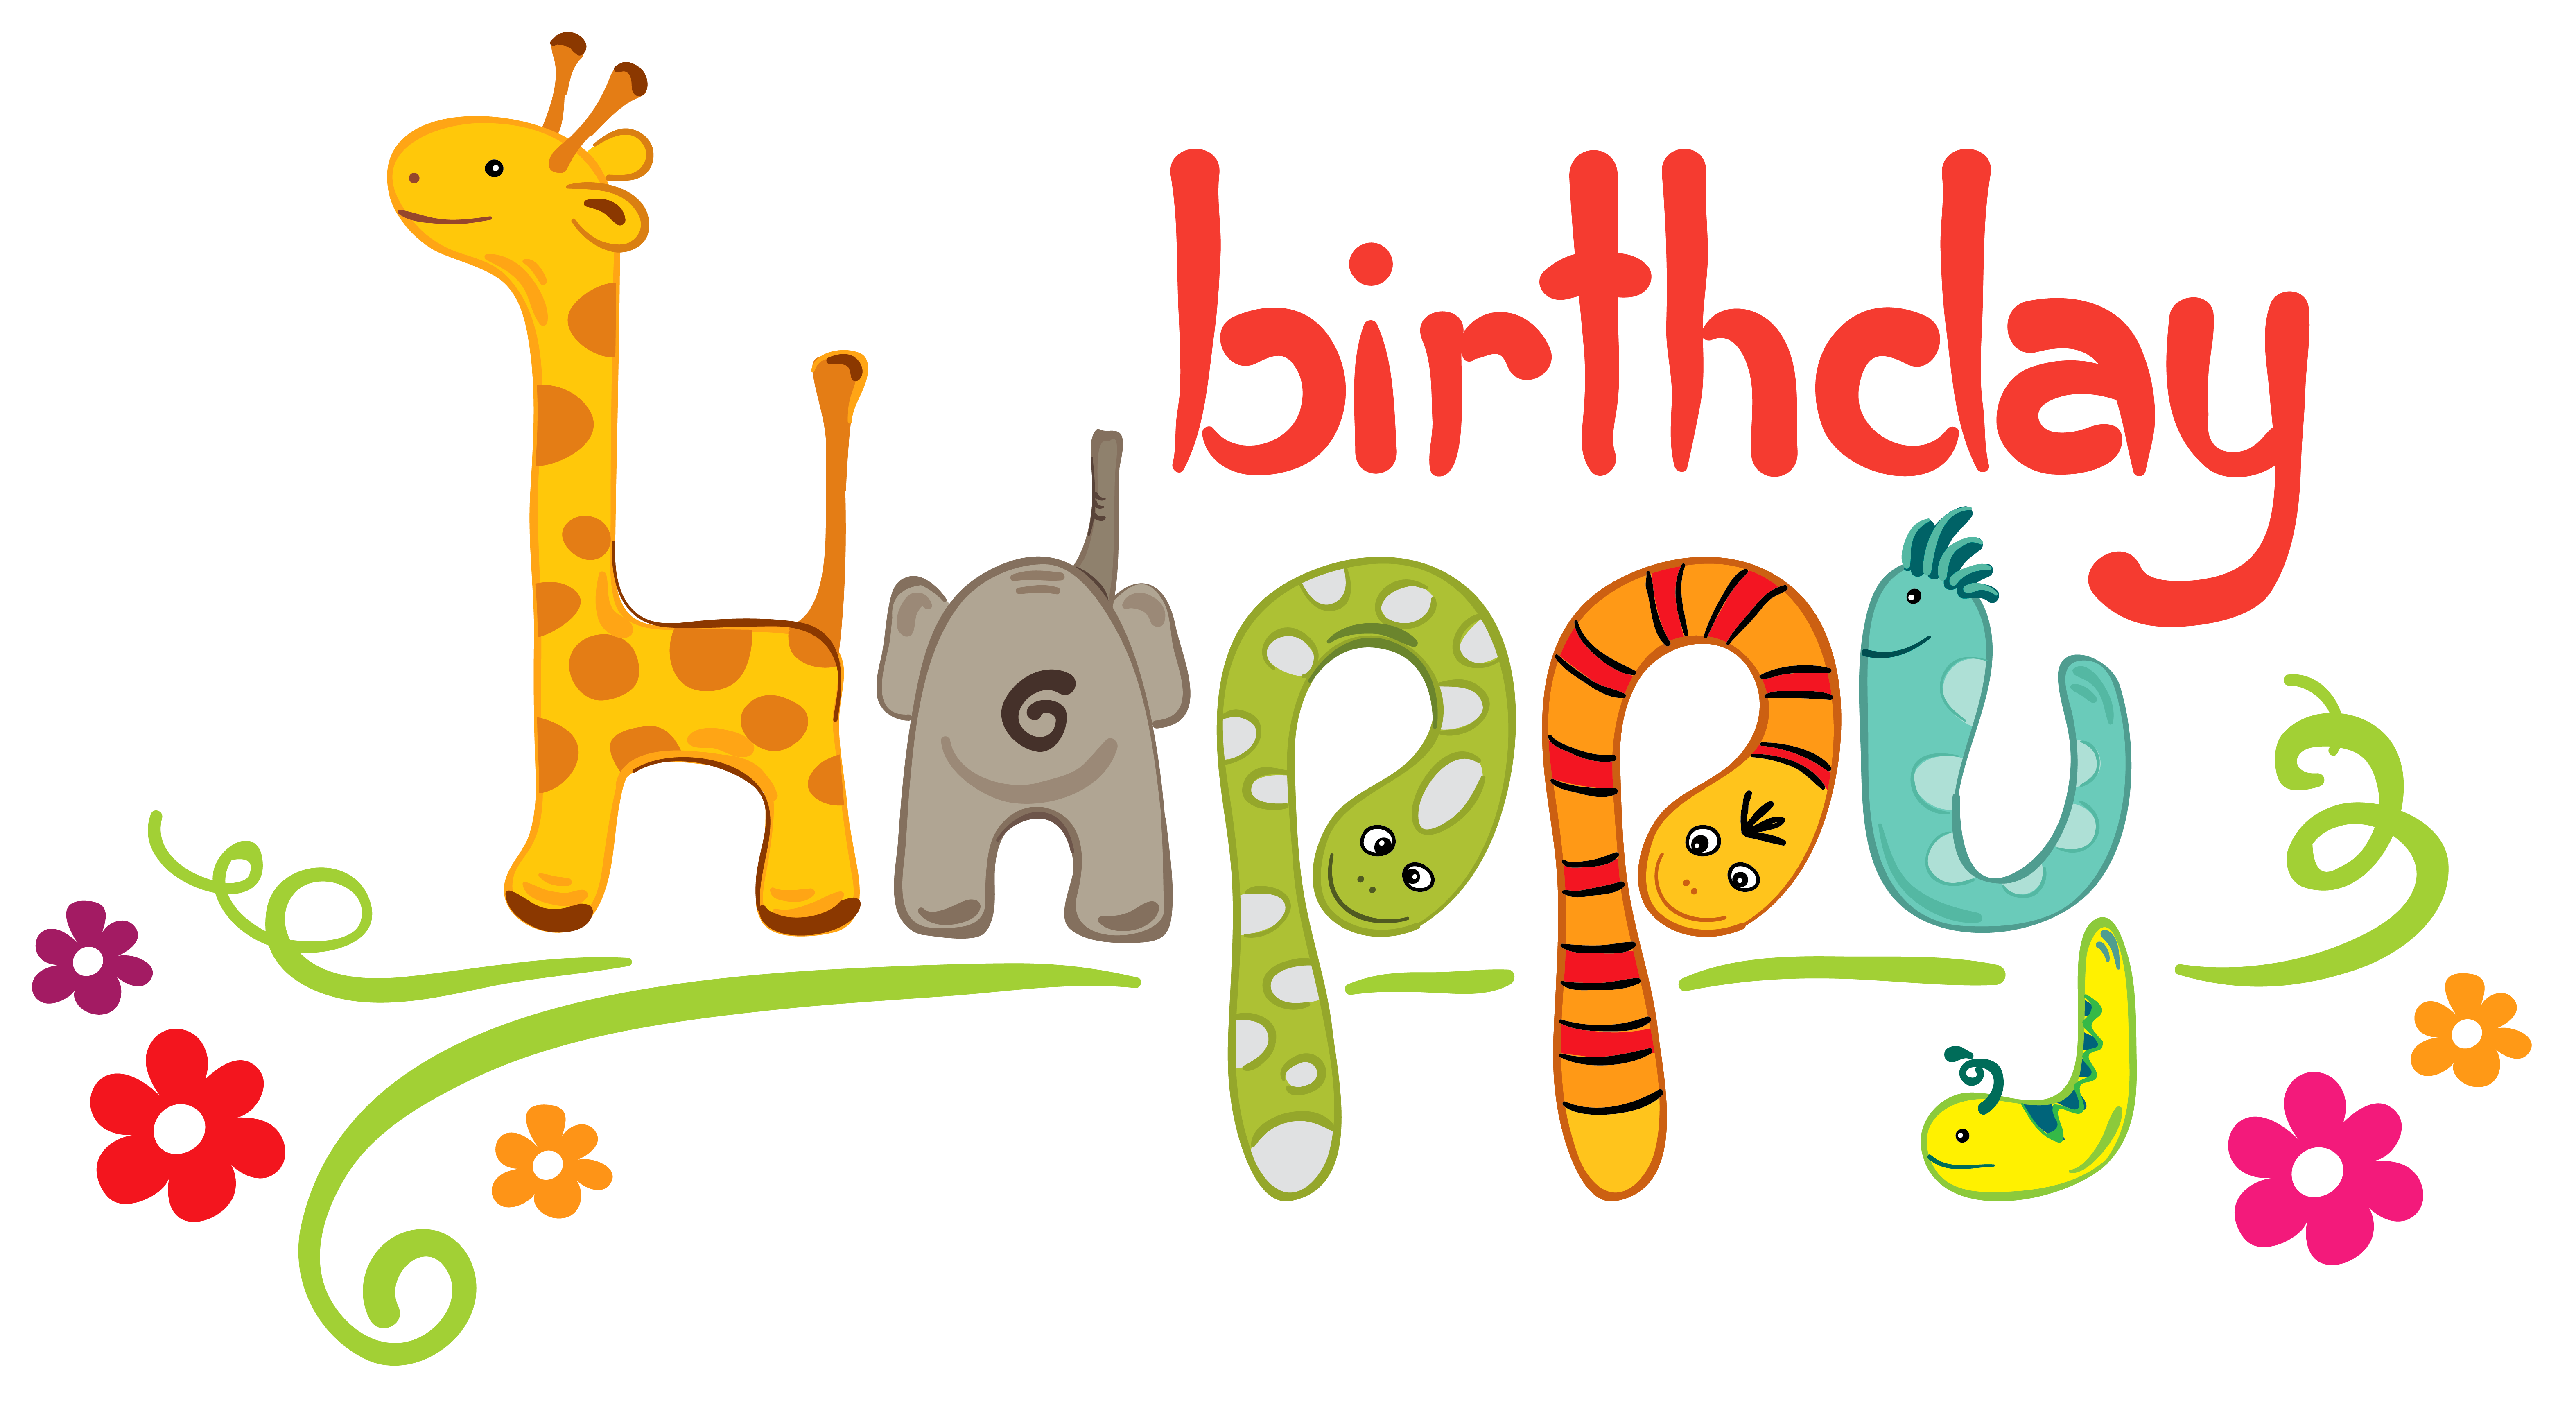 Cute kids png gallery. Volleyball clipart happy birthday